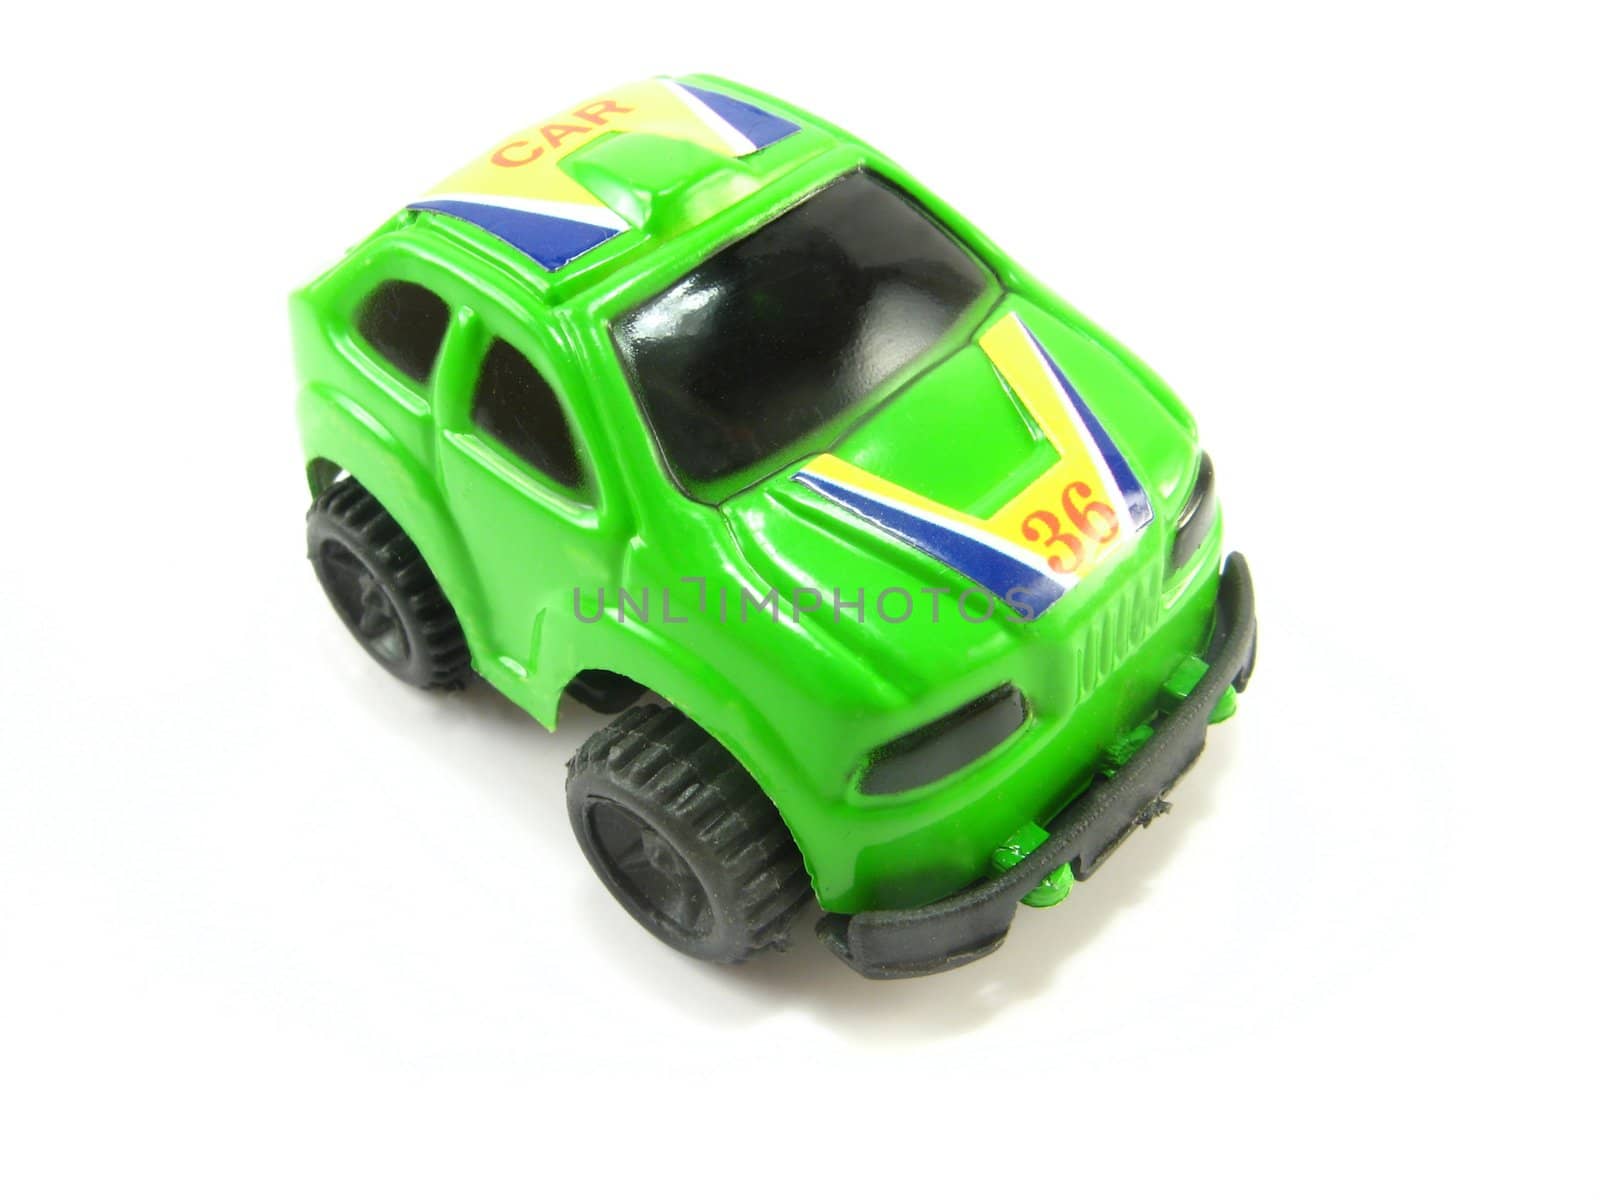 image of a rally toycar on a white background